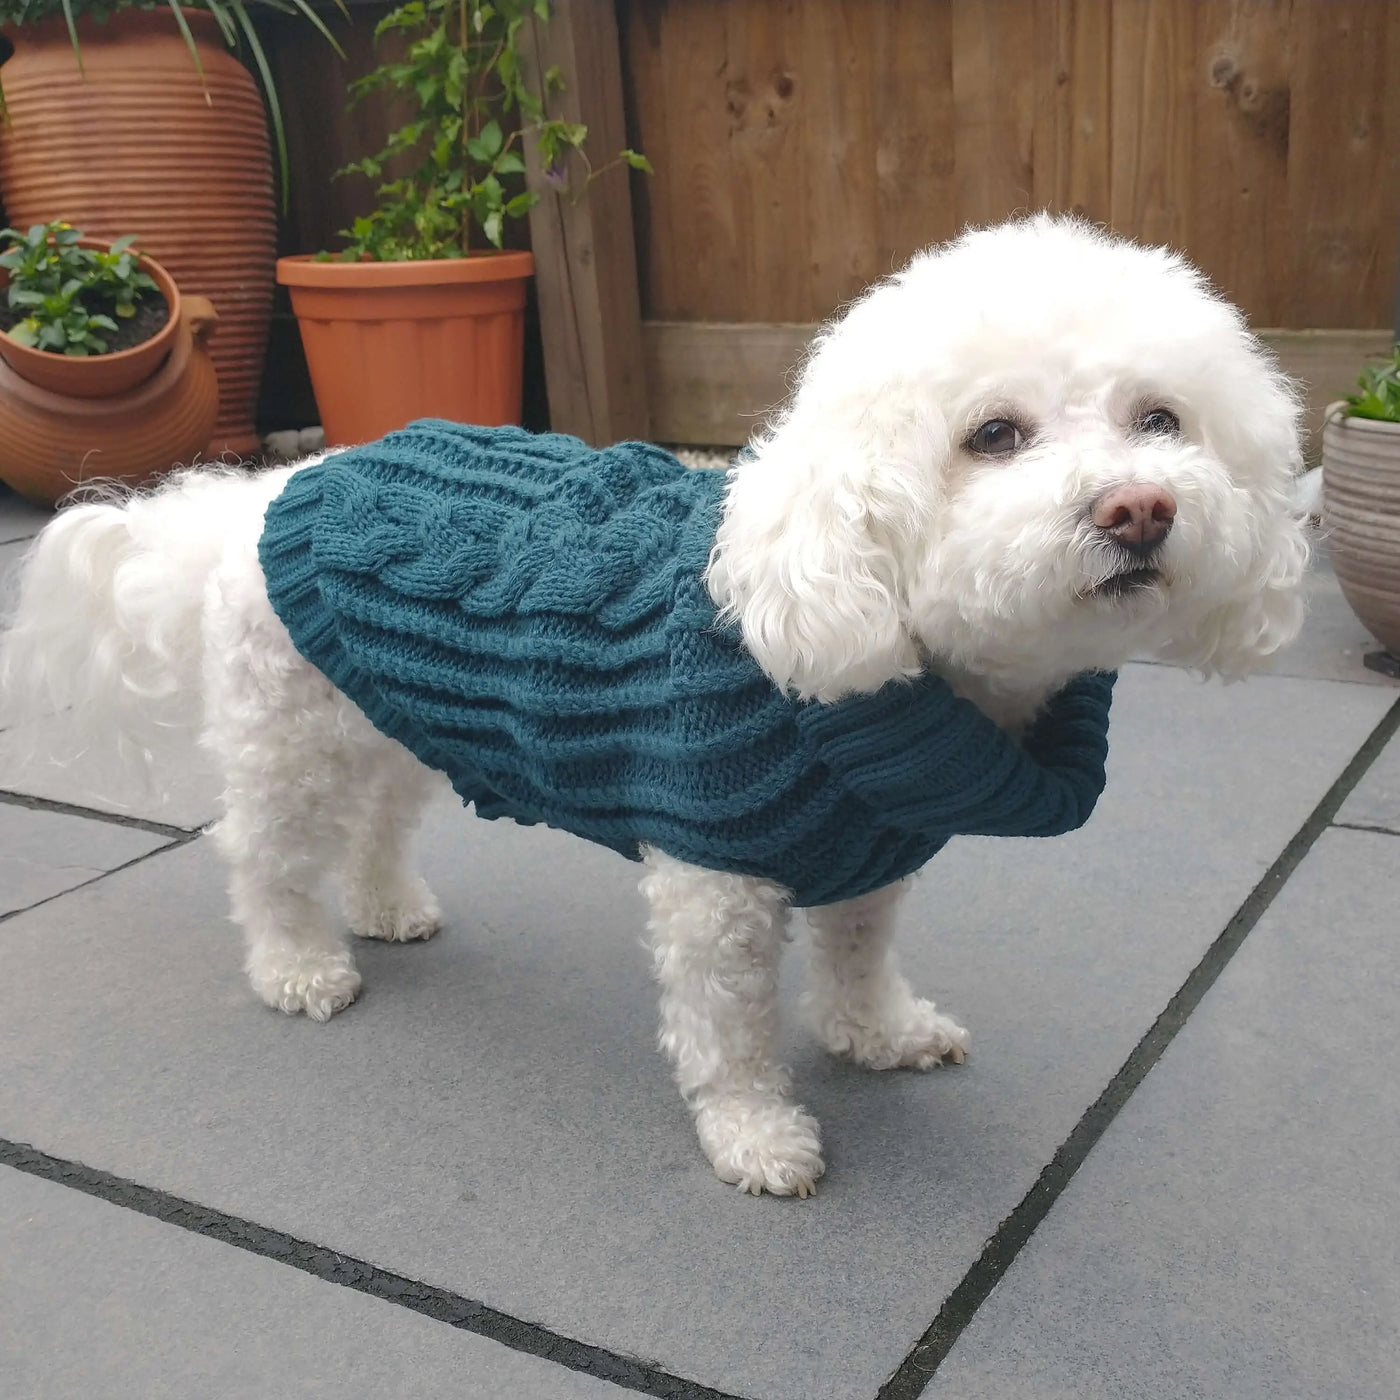 Teal Cable Knit Jumper